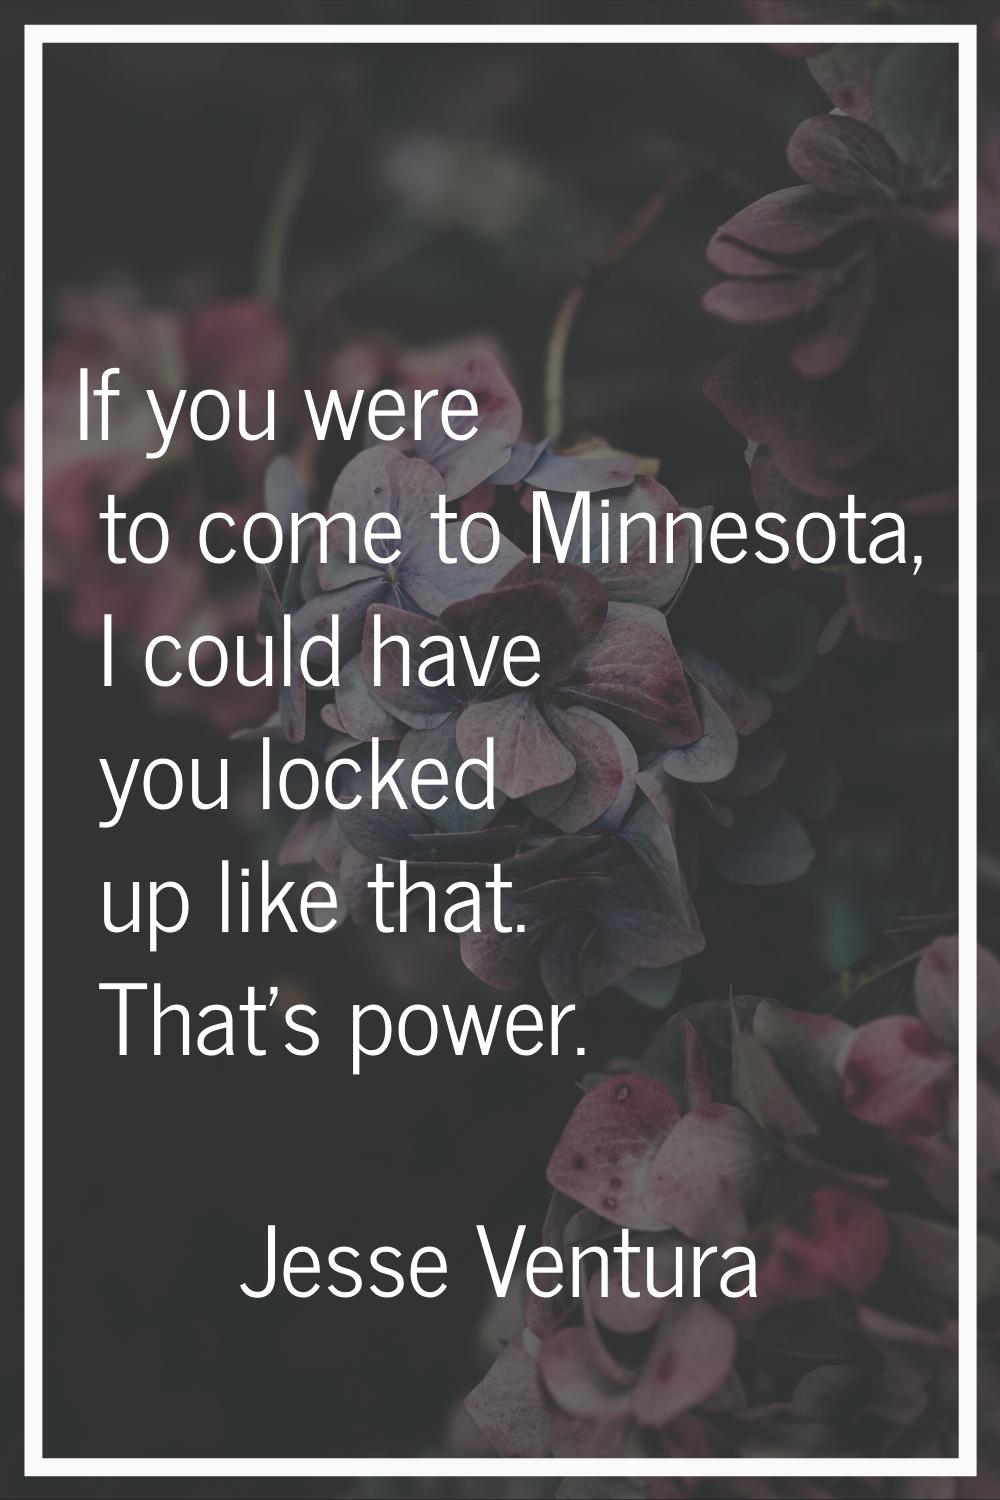 If you were to come to Minnesota, I could have you locked up like that. That's power.